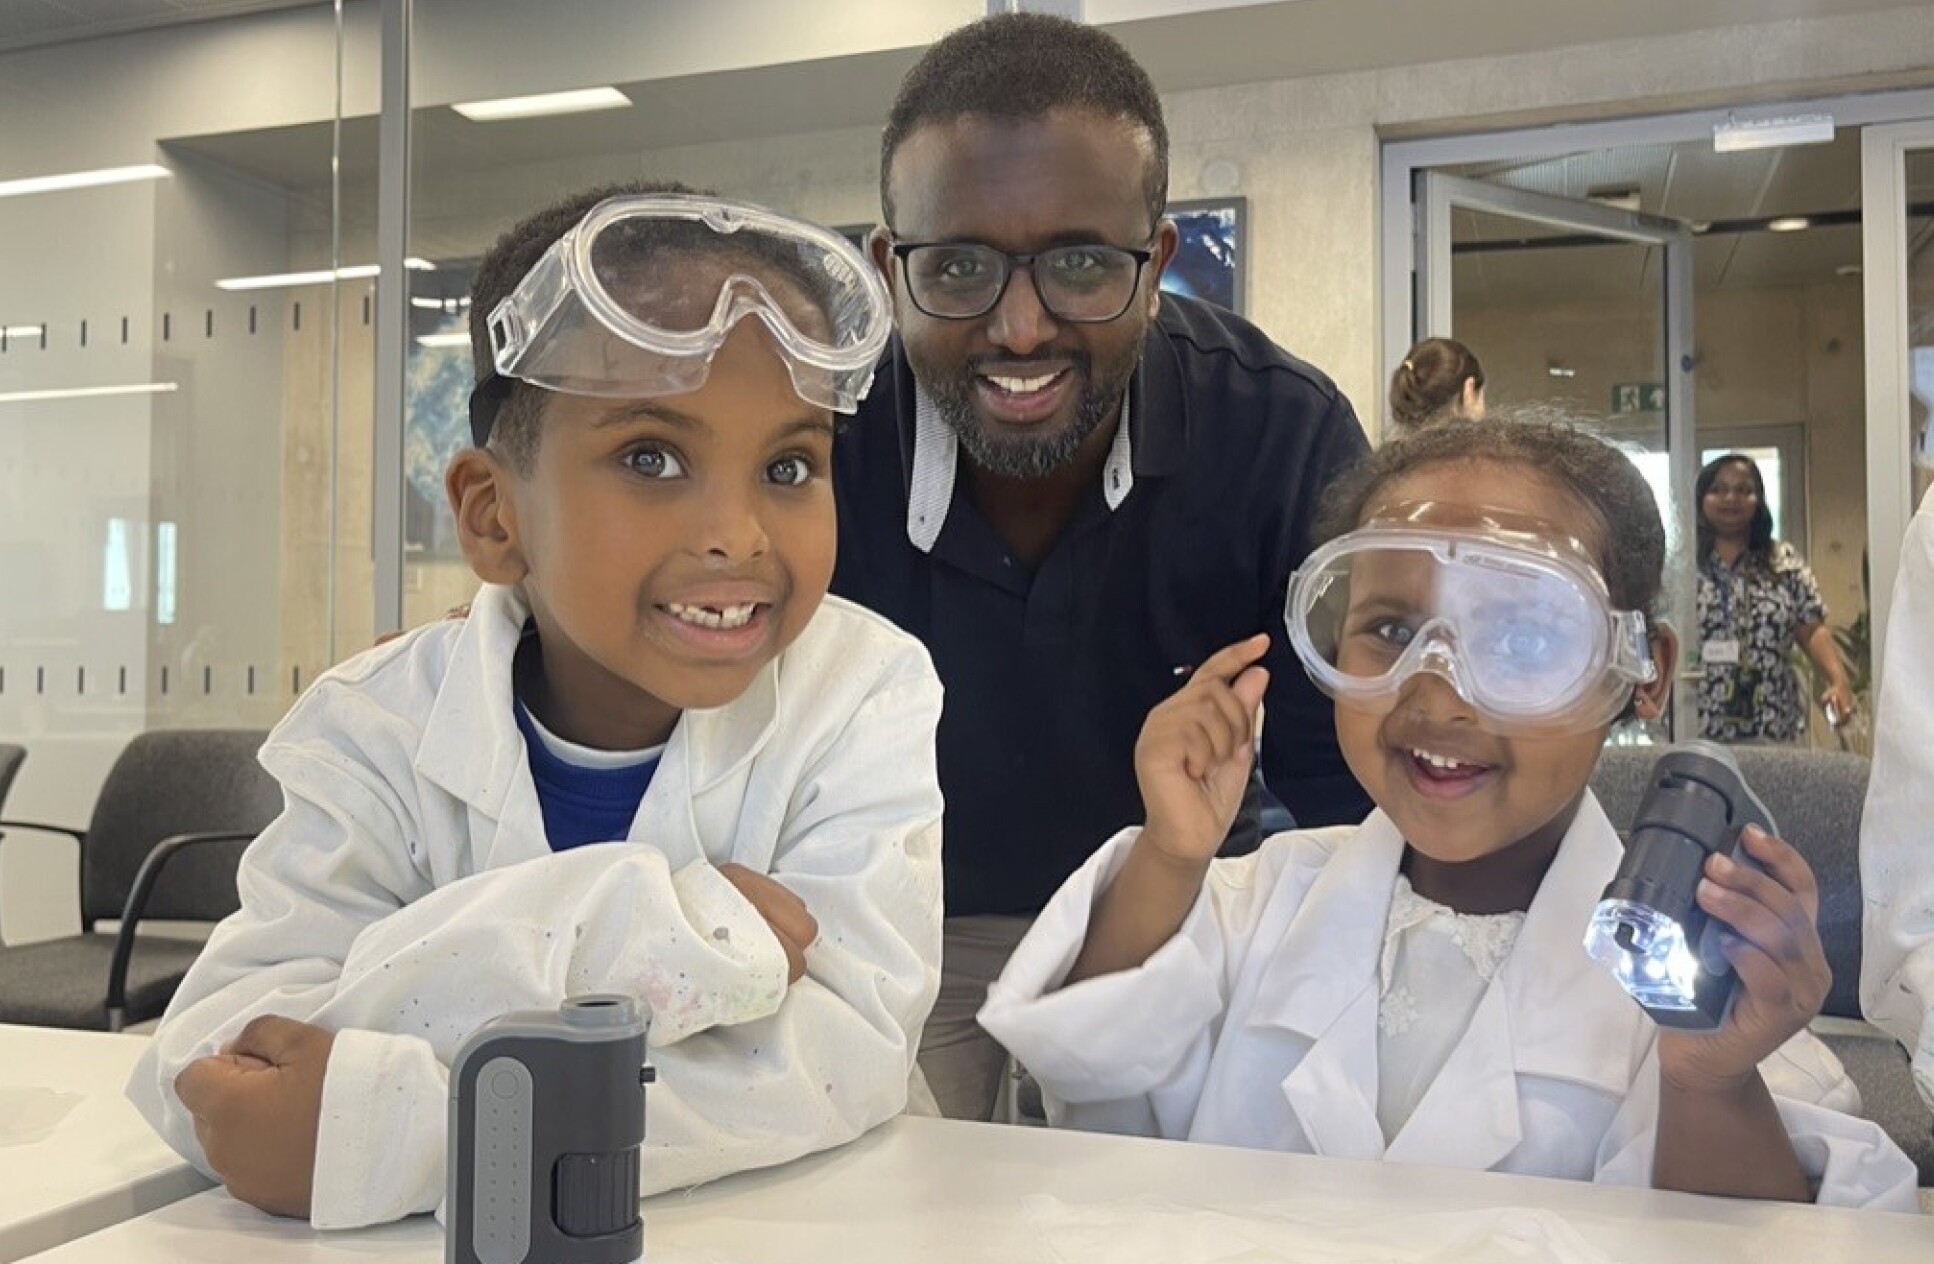 Father and two children wearing lab coats and safety goggles